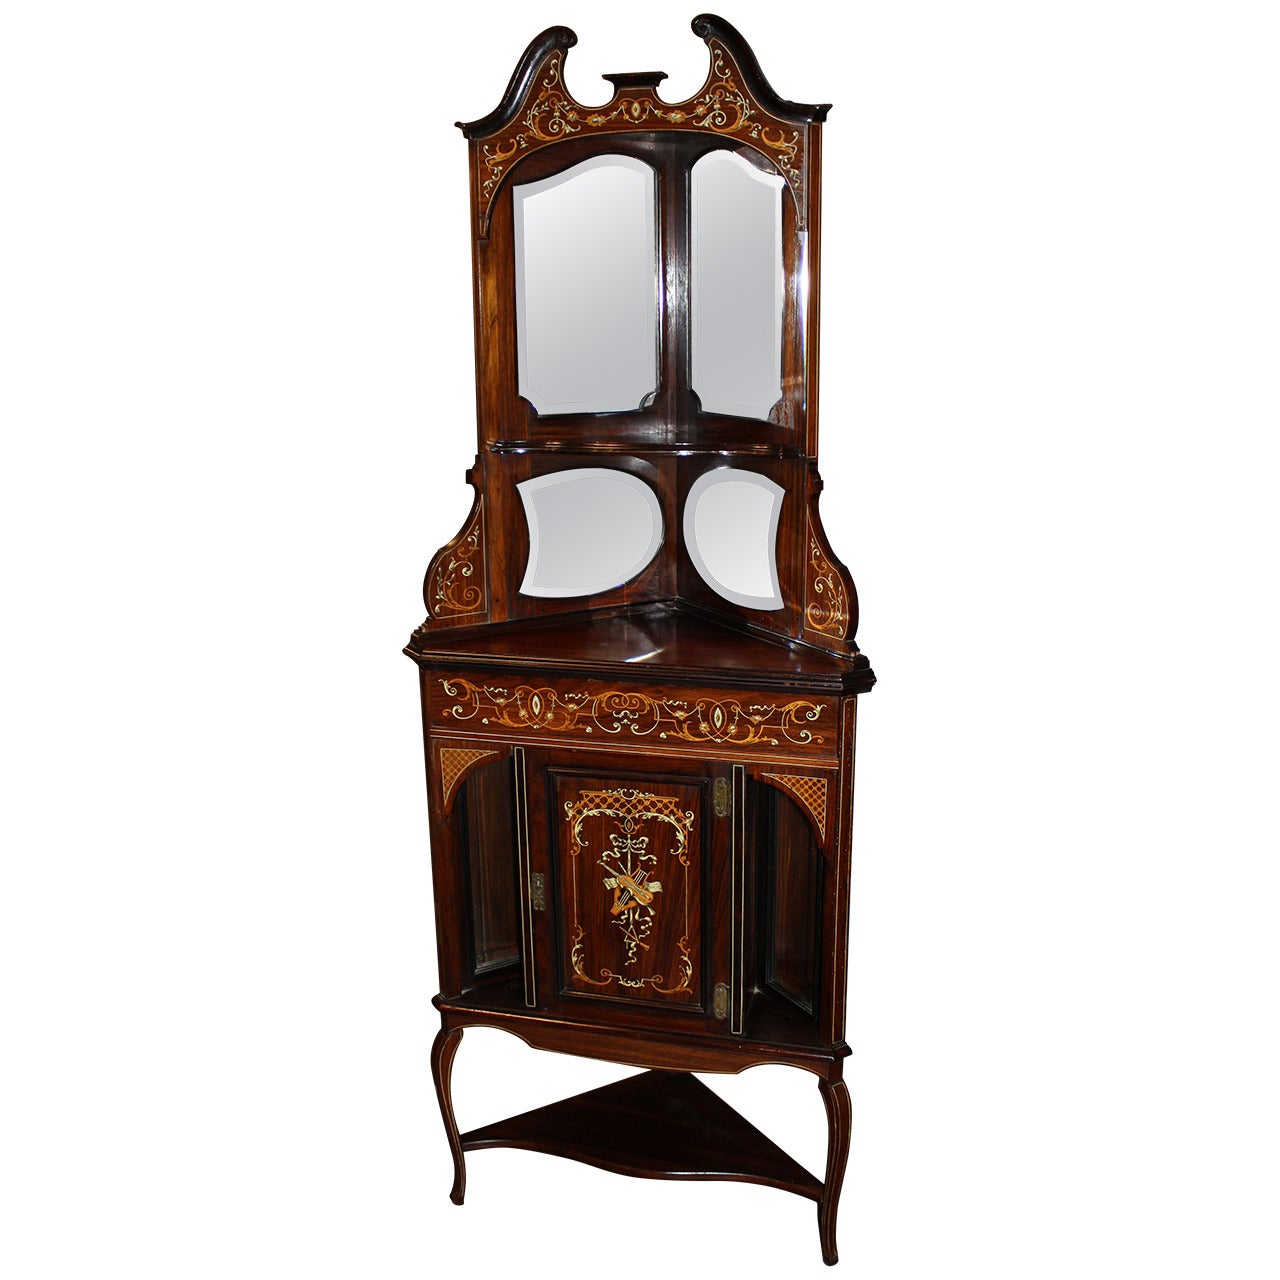 19th Century English Inlaid Rosewood Corner Cupboard with Marquetry